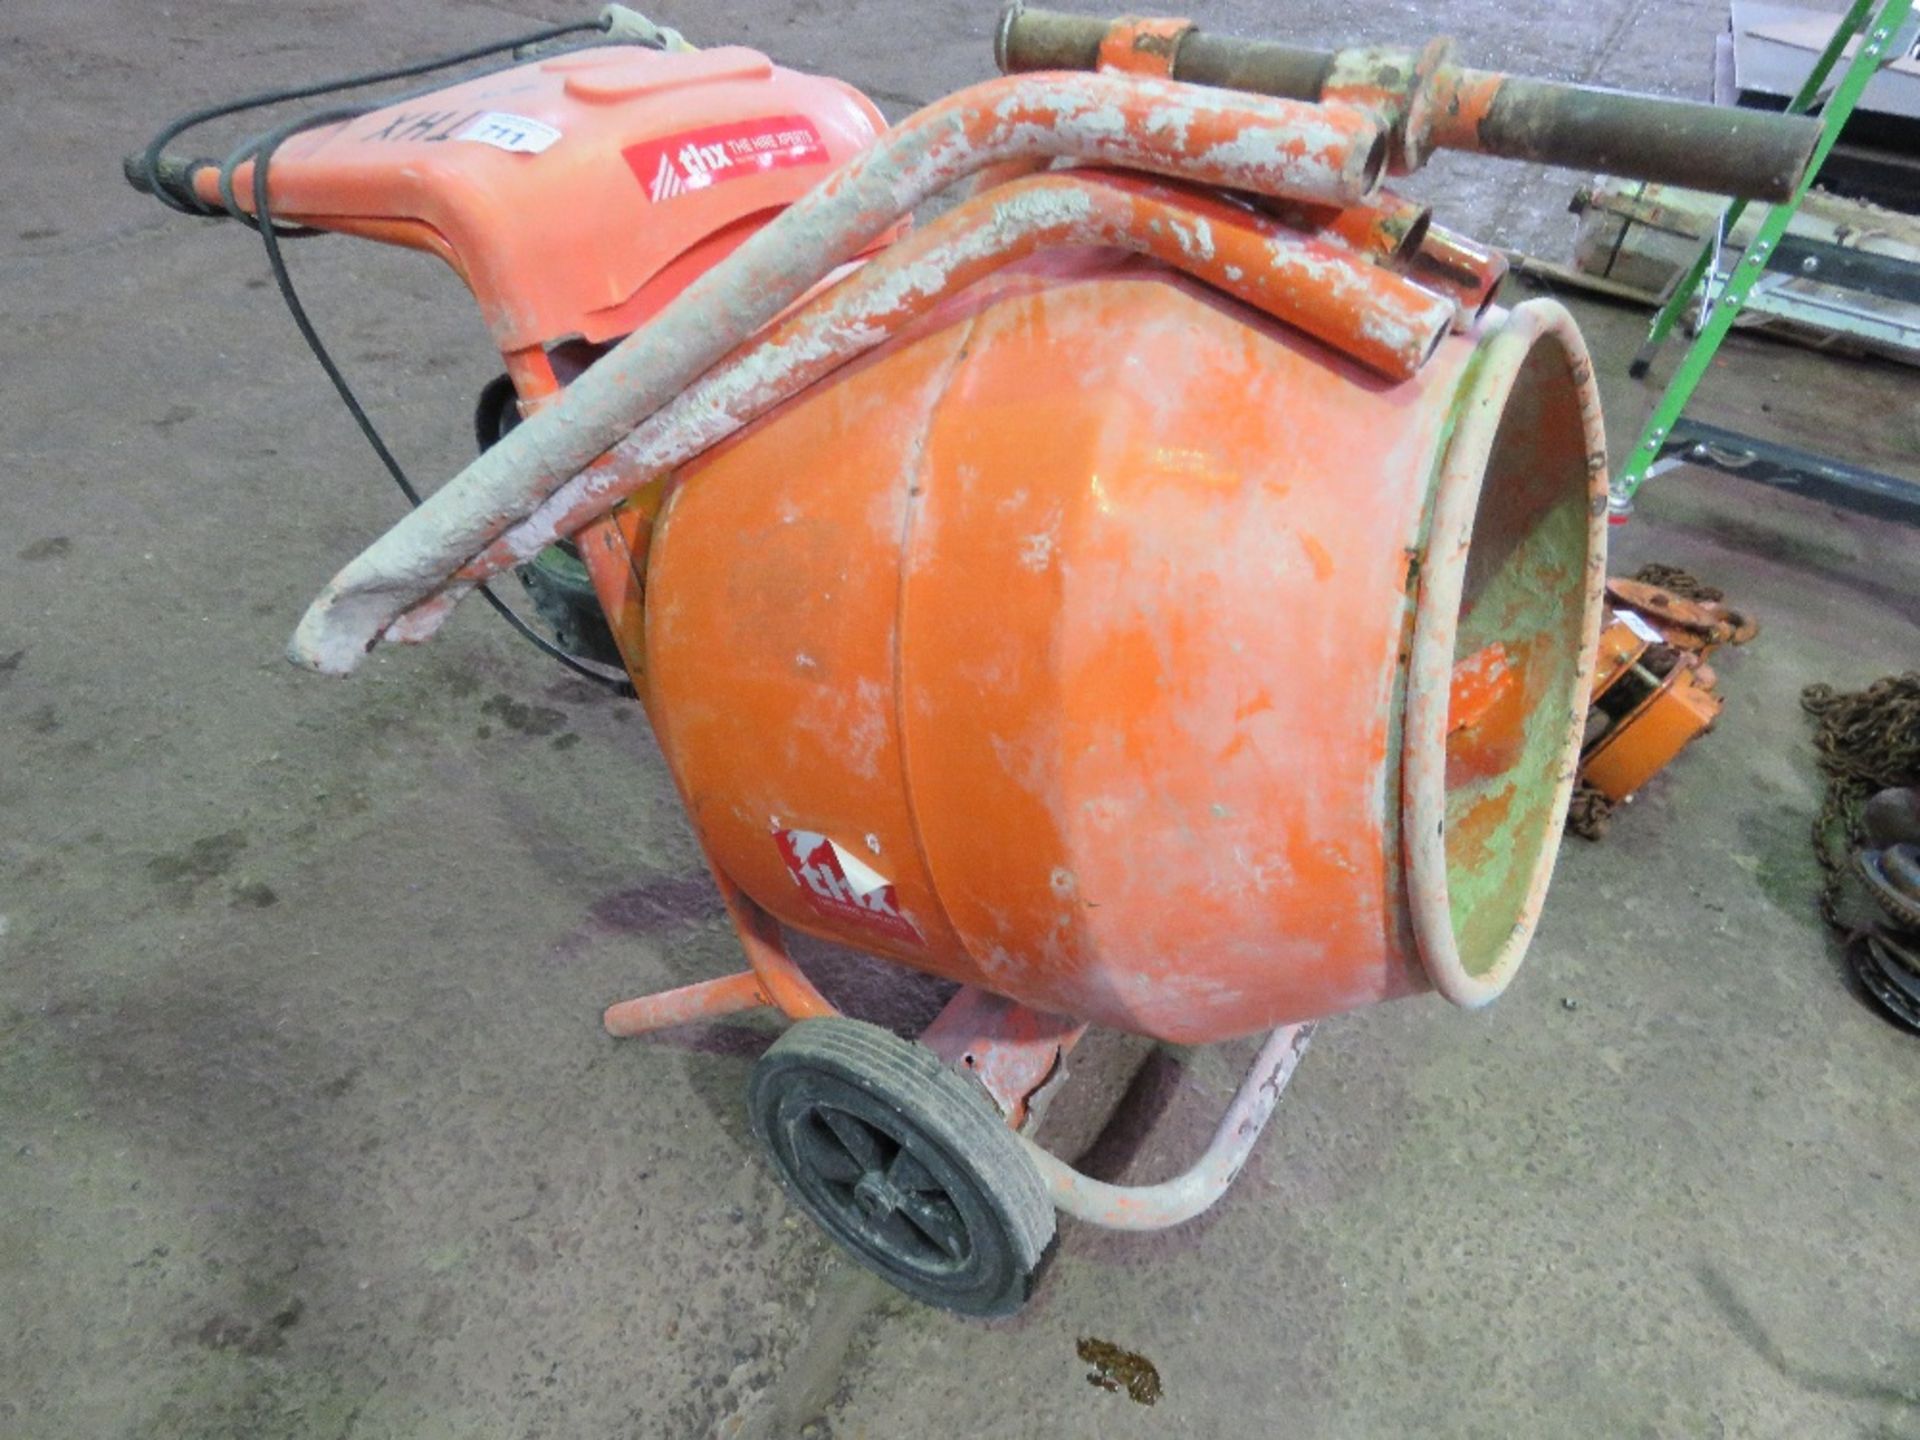 BELLE 110VOLT CEMENT MIXER WITH STAND. YEAR 2018 BUILD.